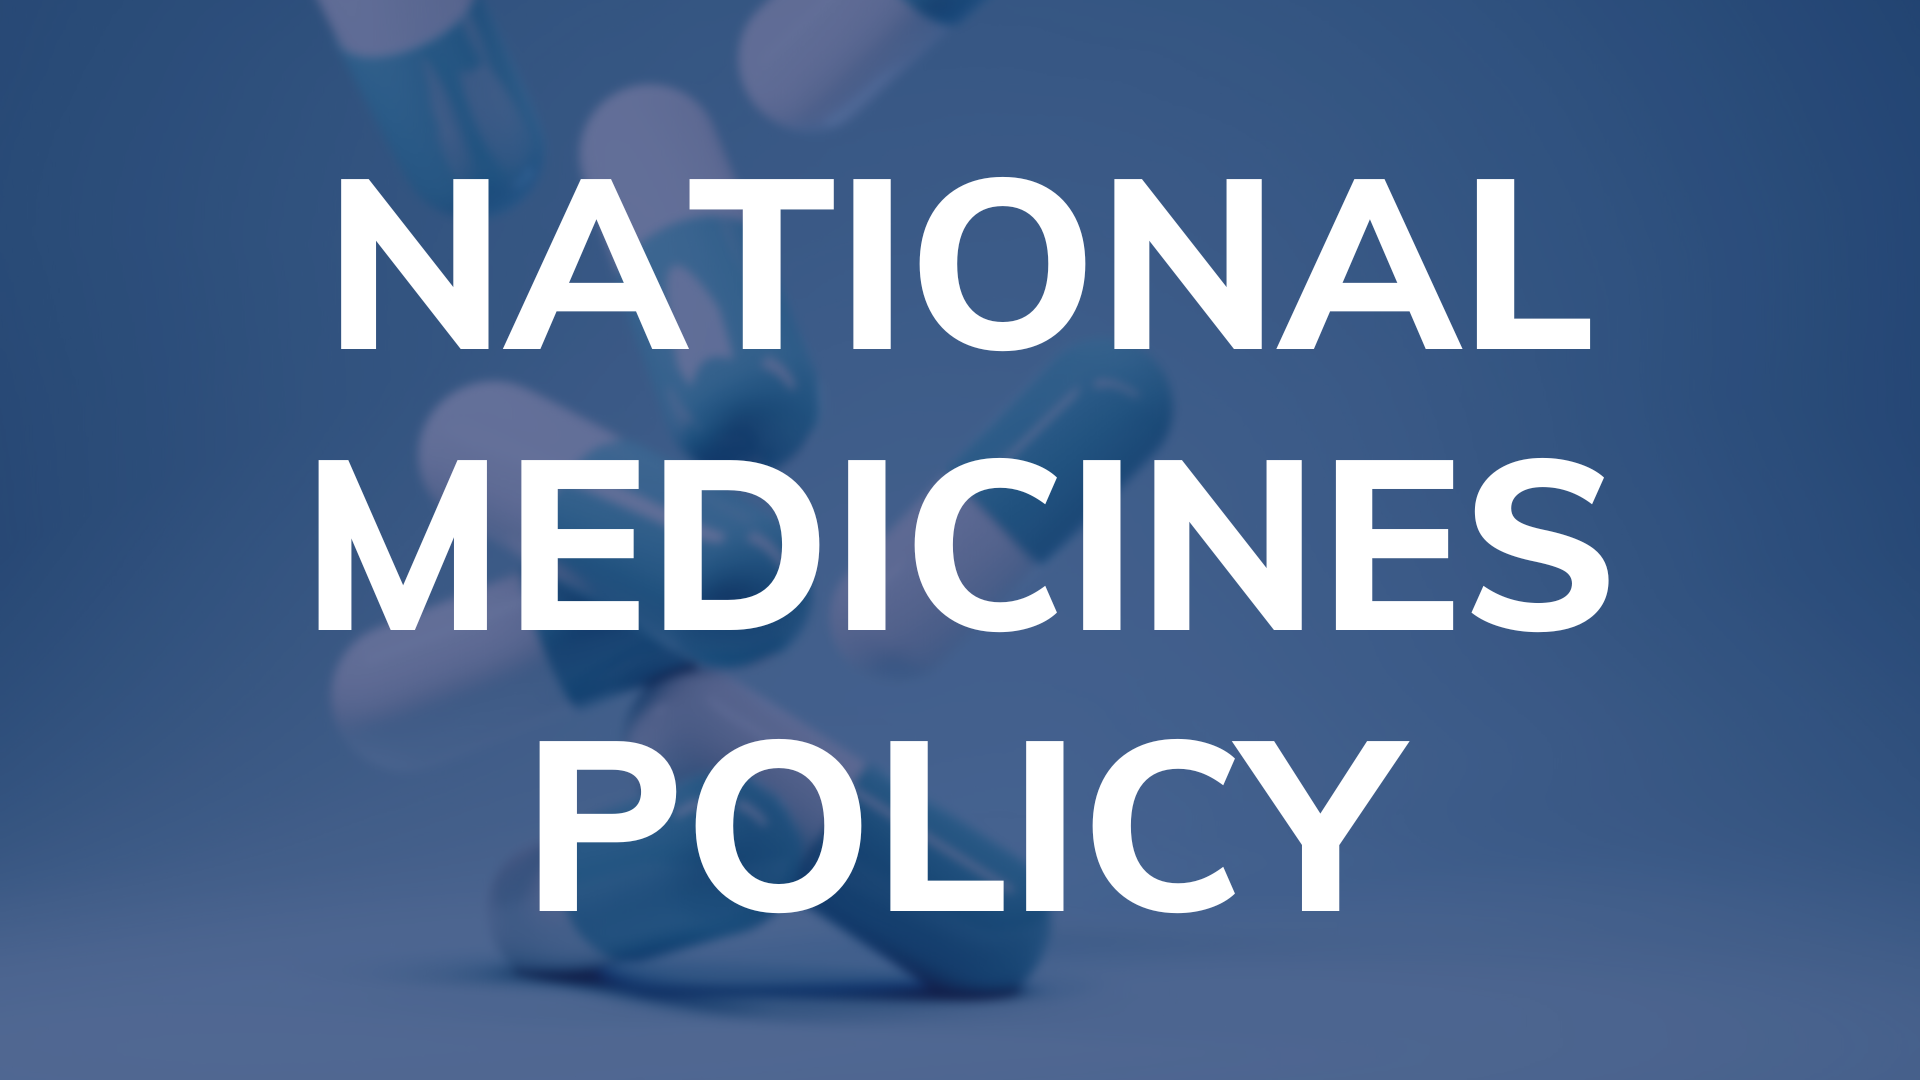 National Medicines Policy draft strides ahead but still room for improvement